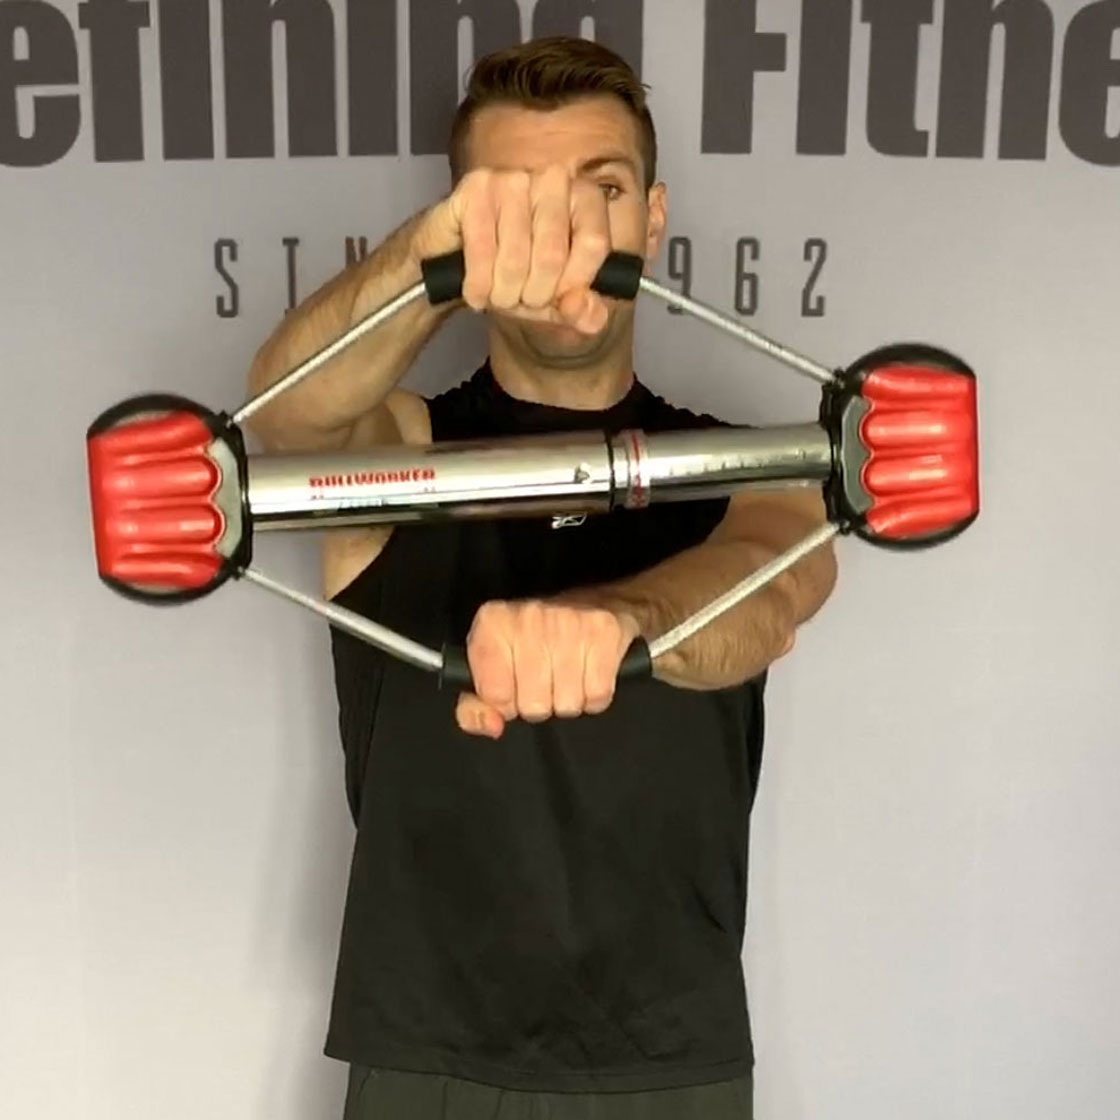 best shoulder exercise to effectively engage your deltoids